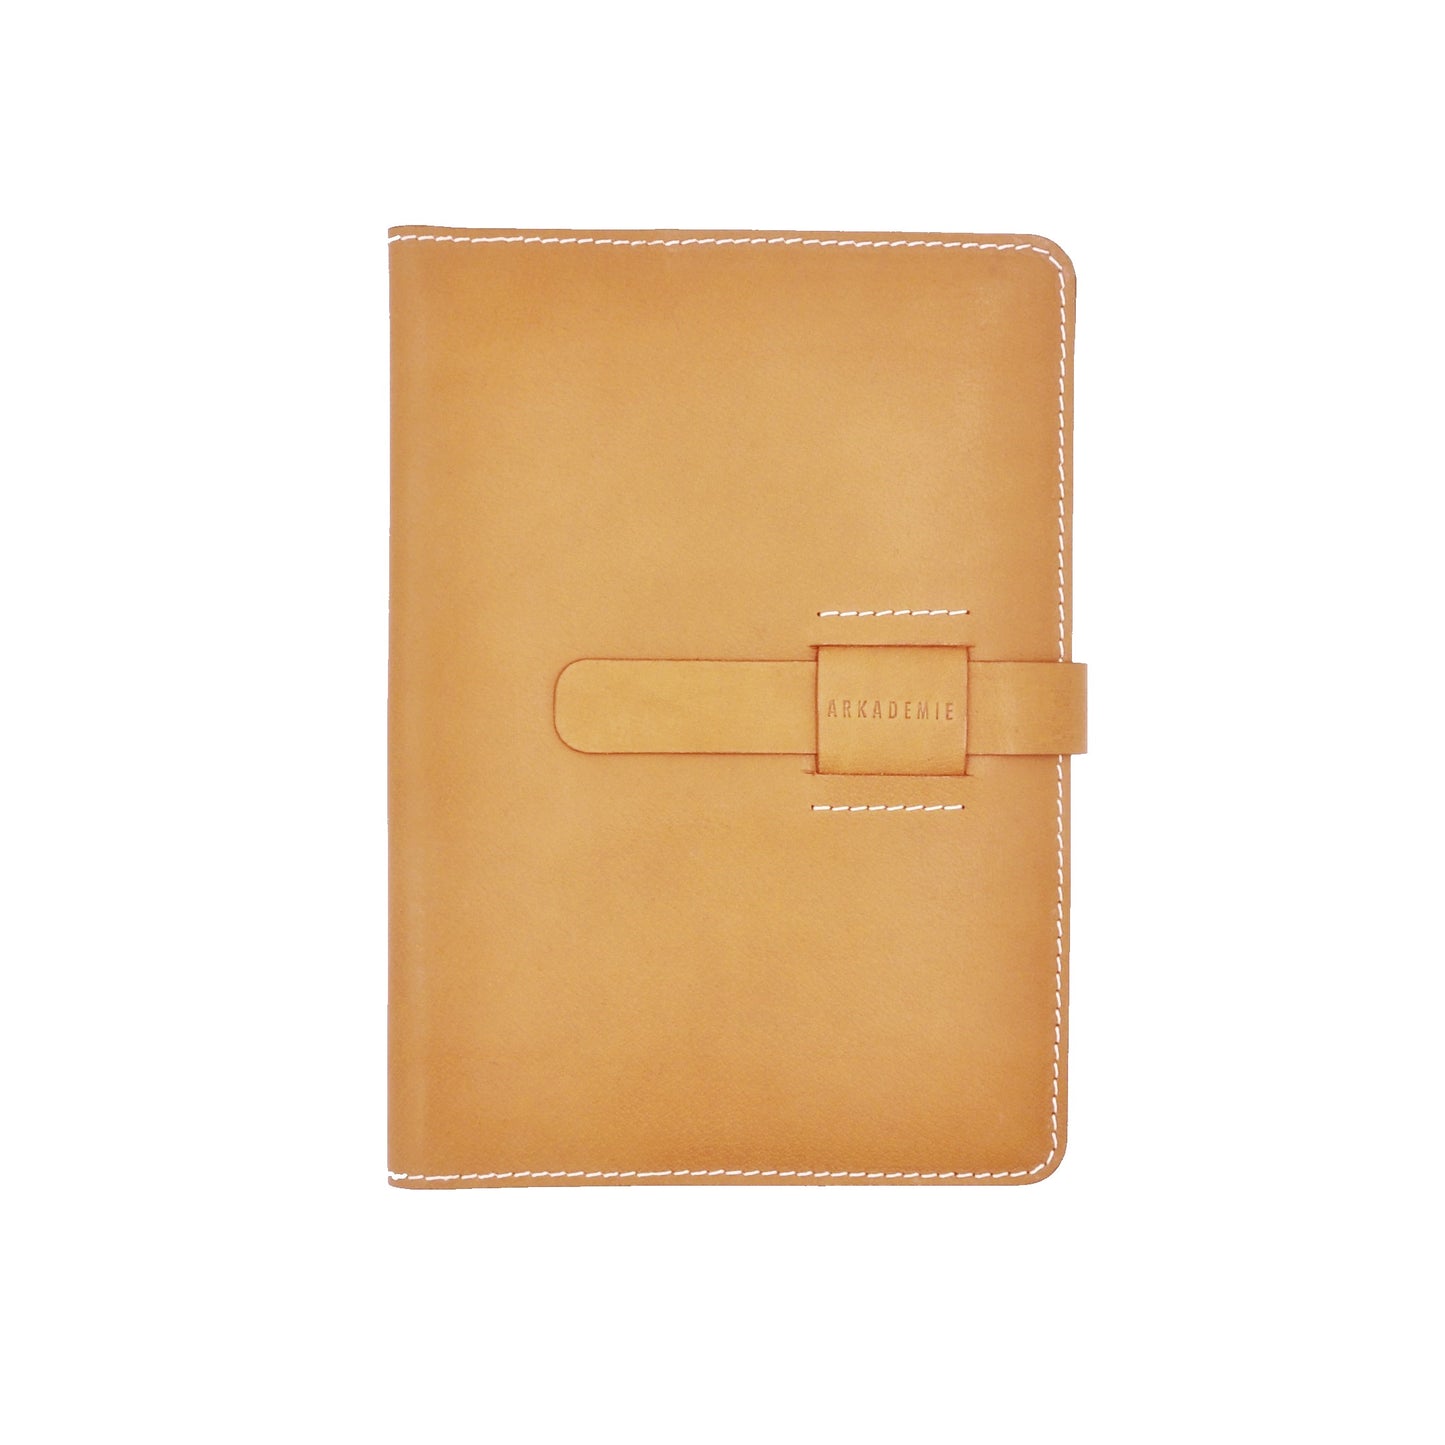 HERITAGE A5-P Leather Notebook Cover